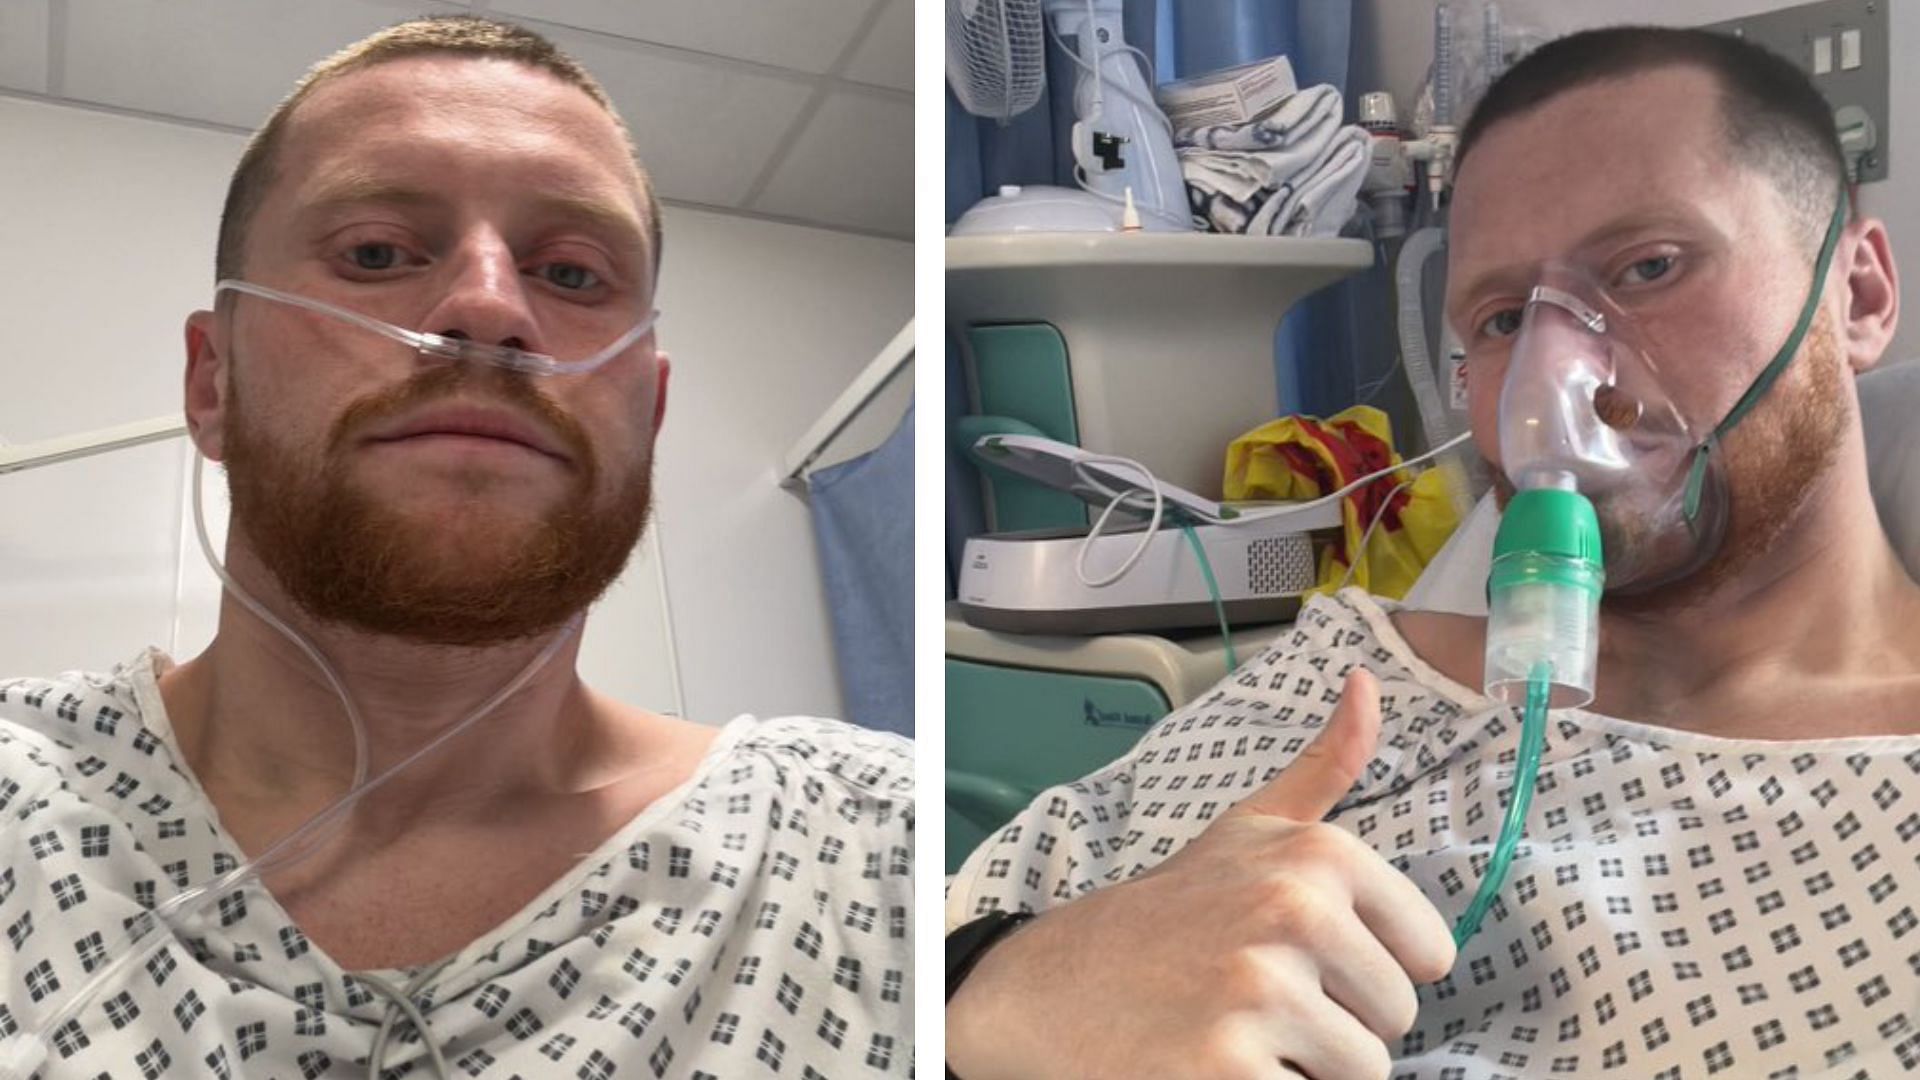 Behzinga had to be hospitalized after asthma attack (Image via Ethan Payne/X)